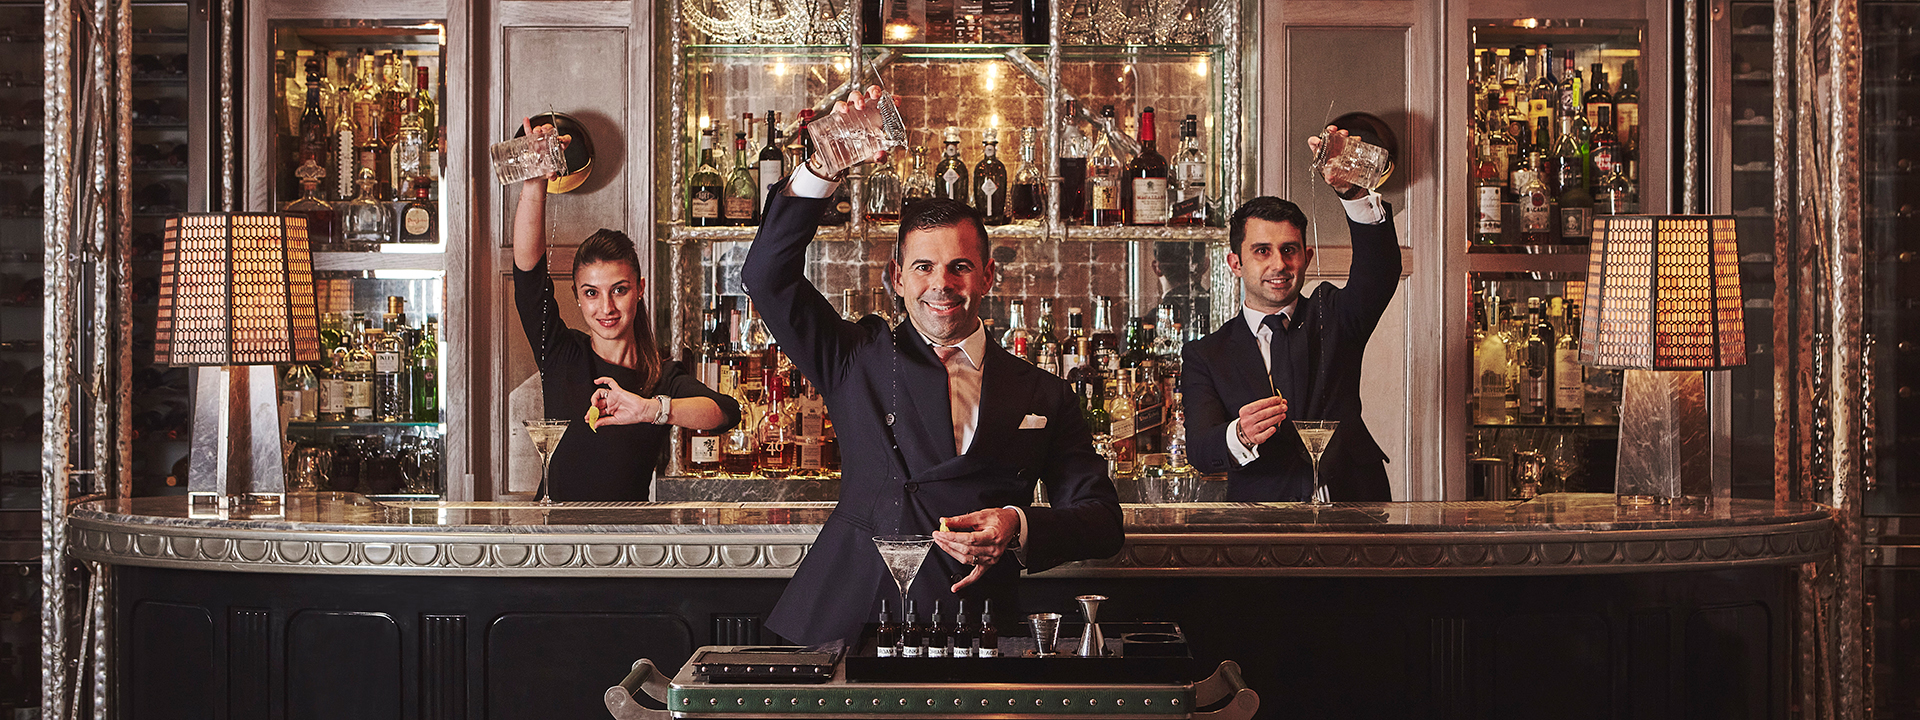 The Connaught Bar. The image shows three bar tenders - two men and one woman - who are making and pouring cocktails. They are all smiling and looking at the camera. They are all standing in front of a well-stocked bar. 